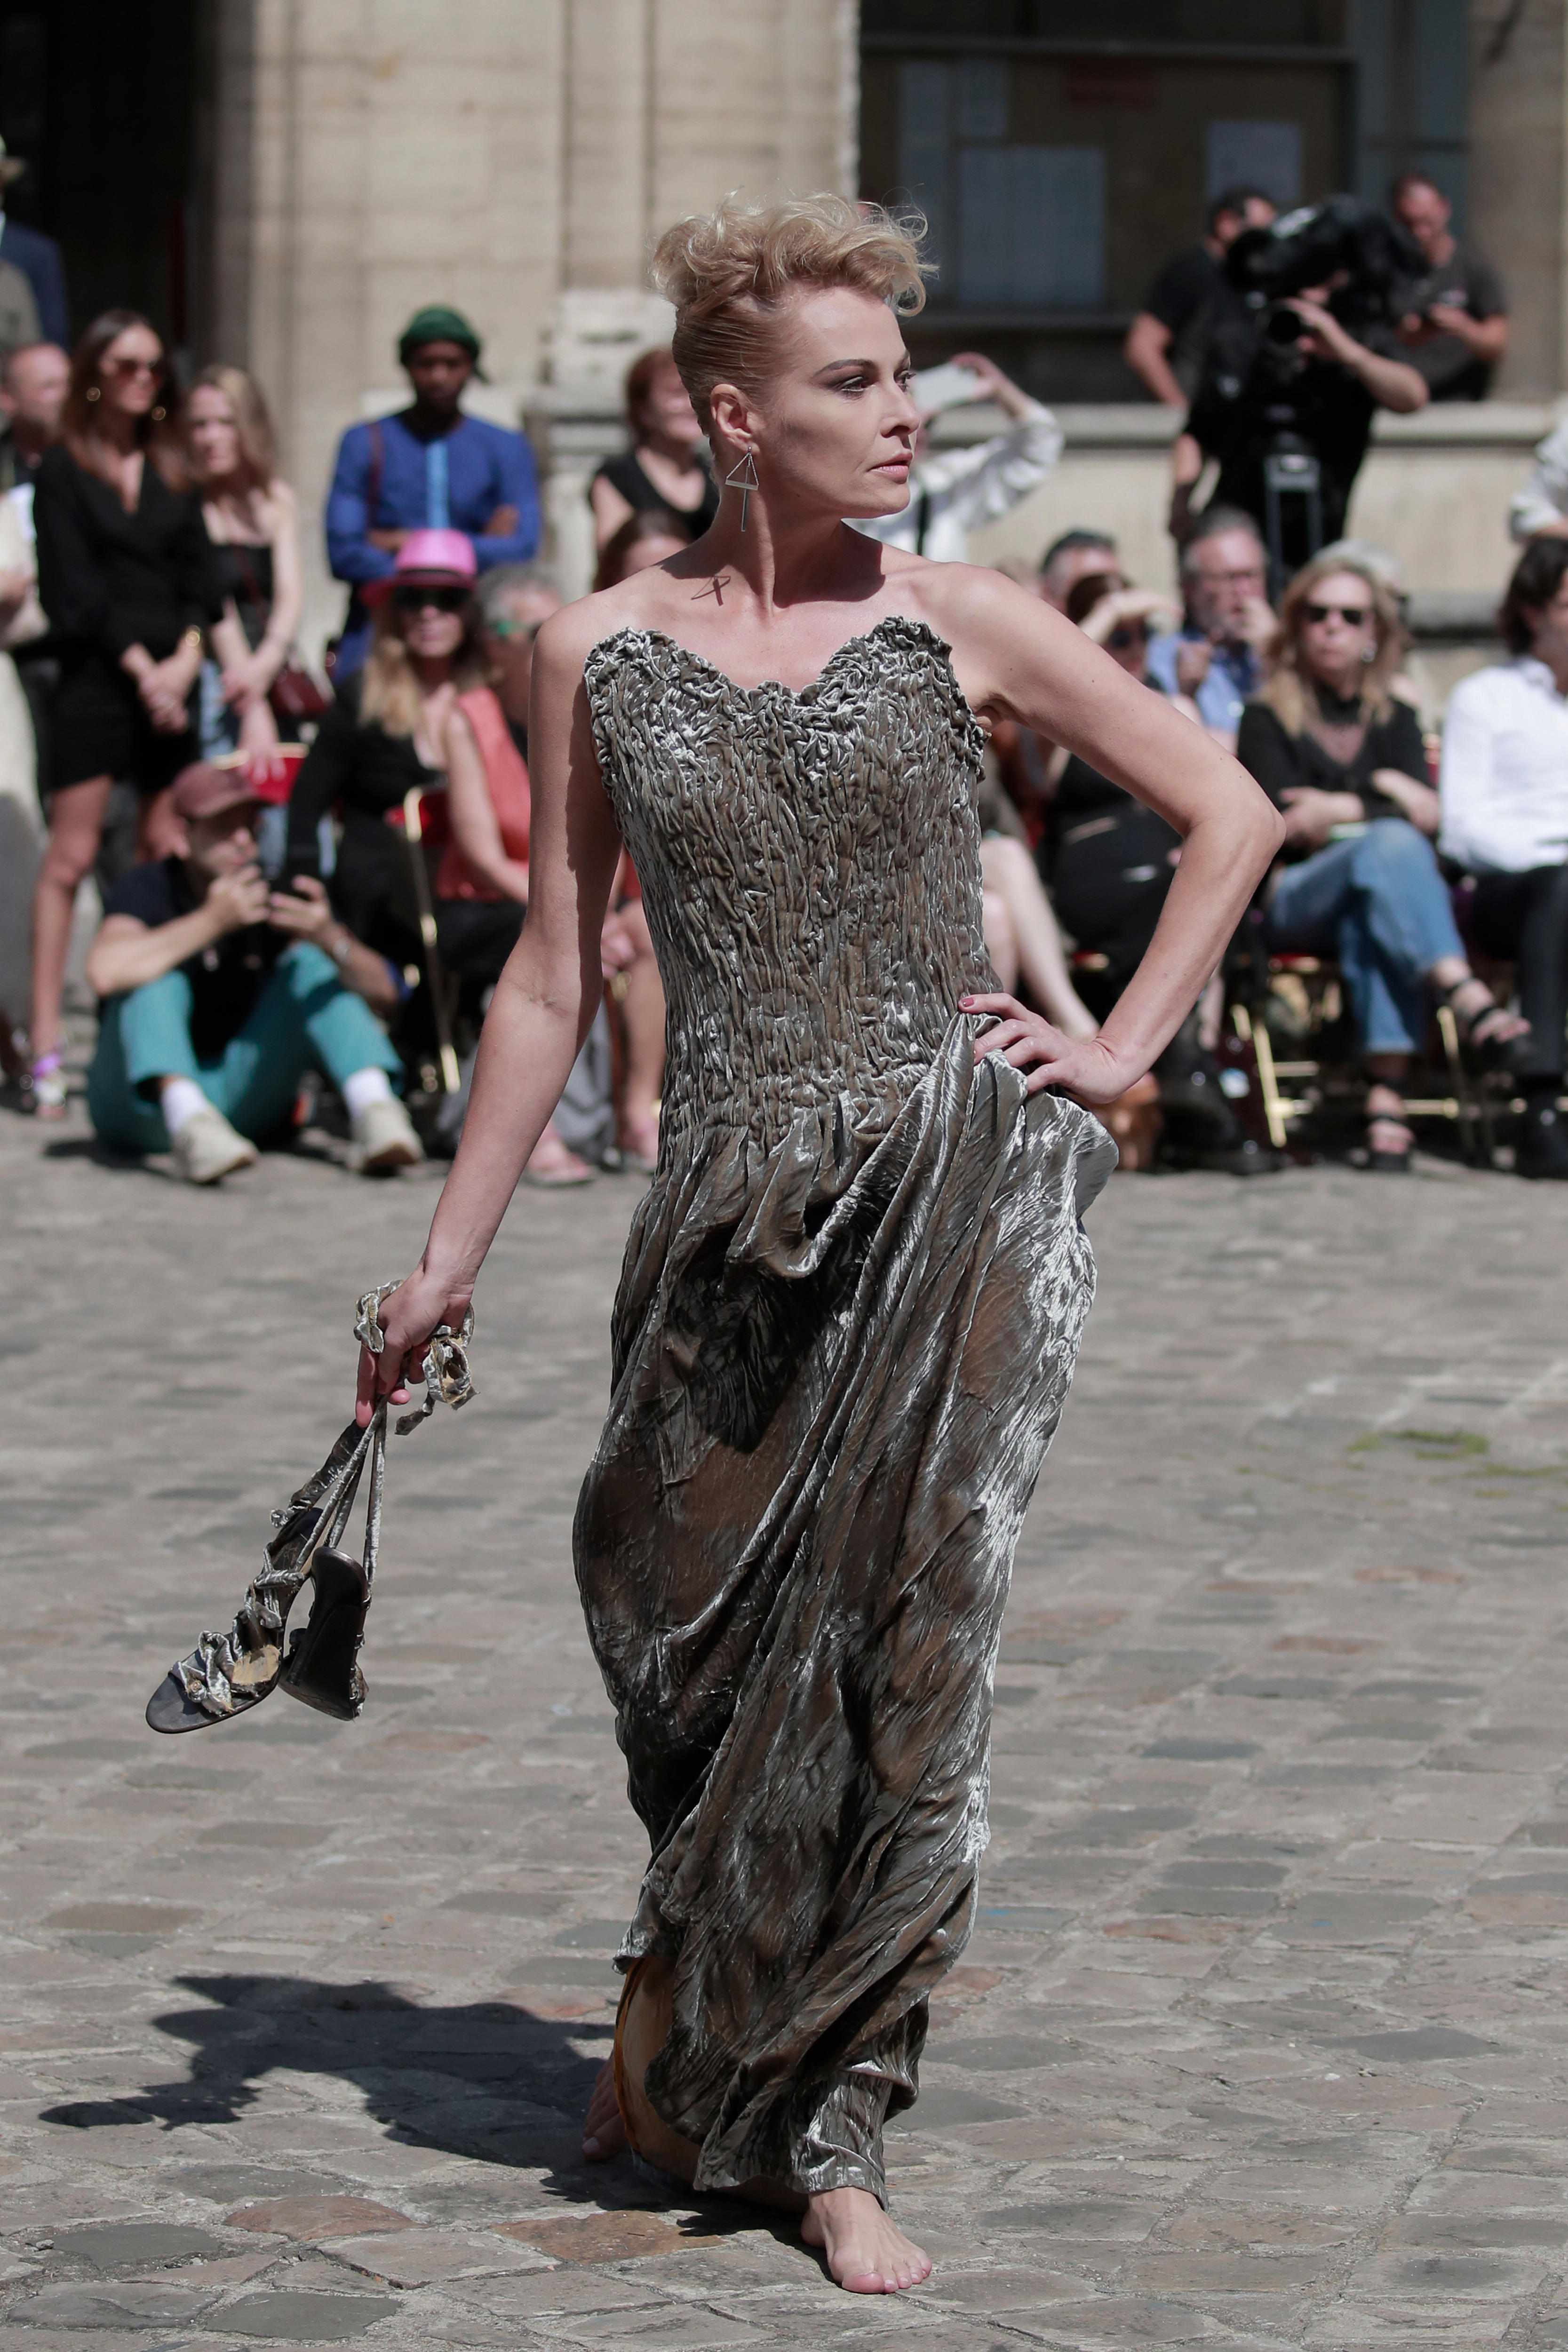 A model in a sparkly dress holding a pair of high heel shoes. 